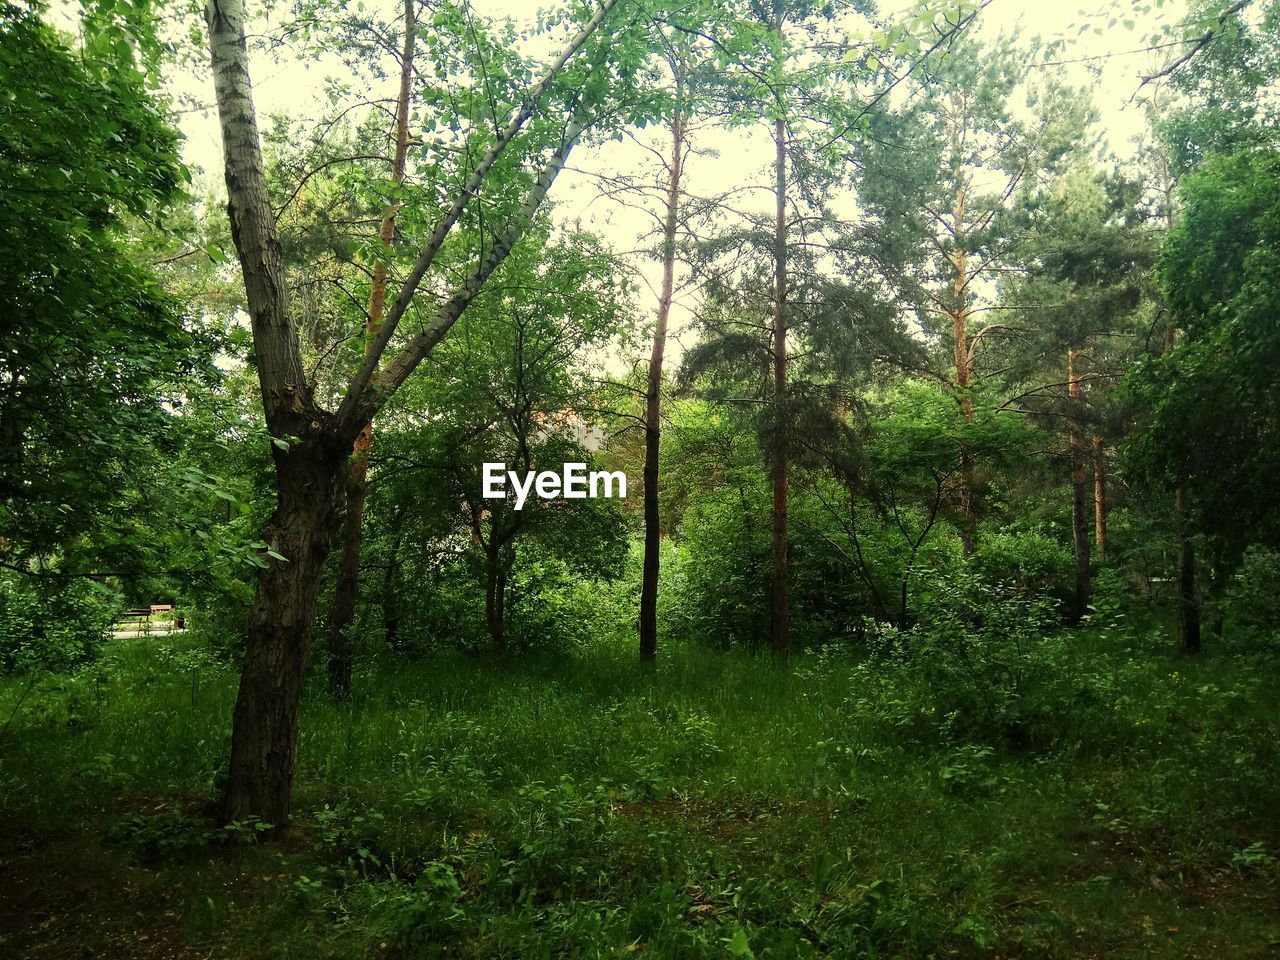 VIEW OF TREES IN FOREST